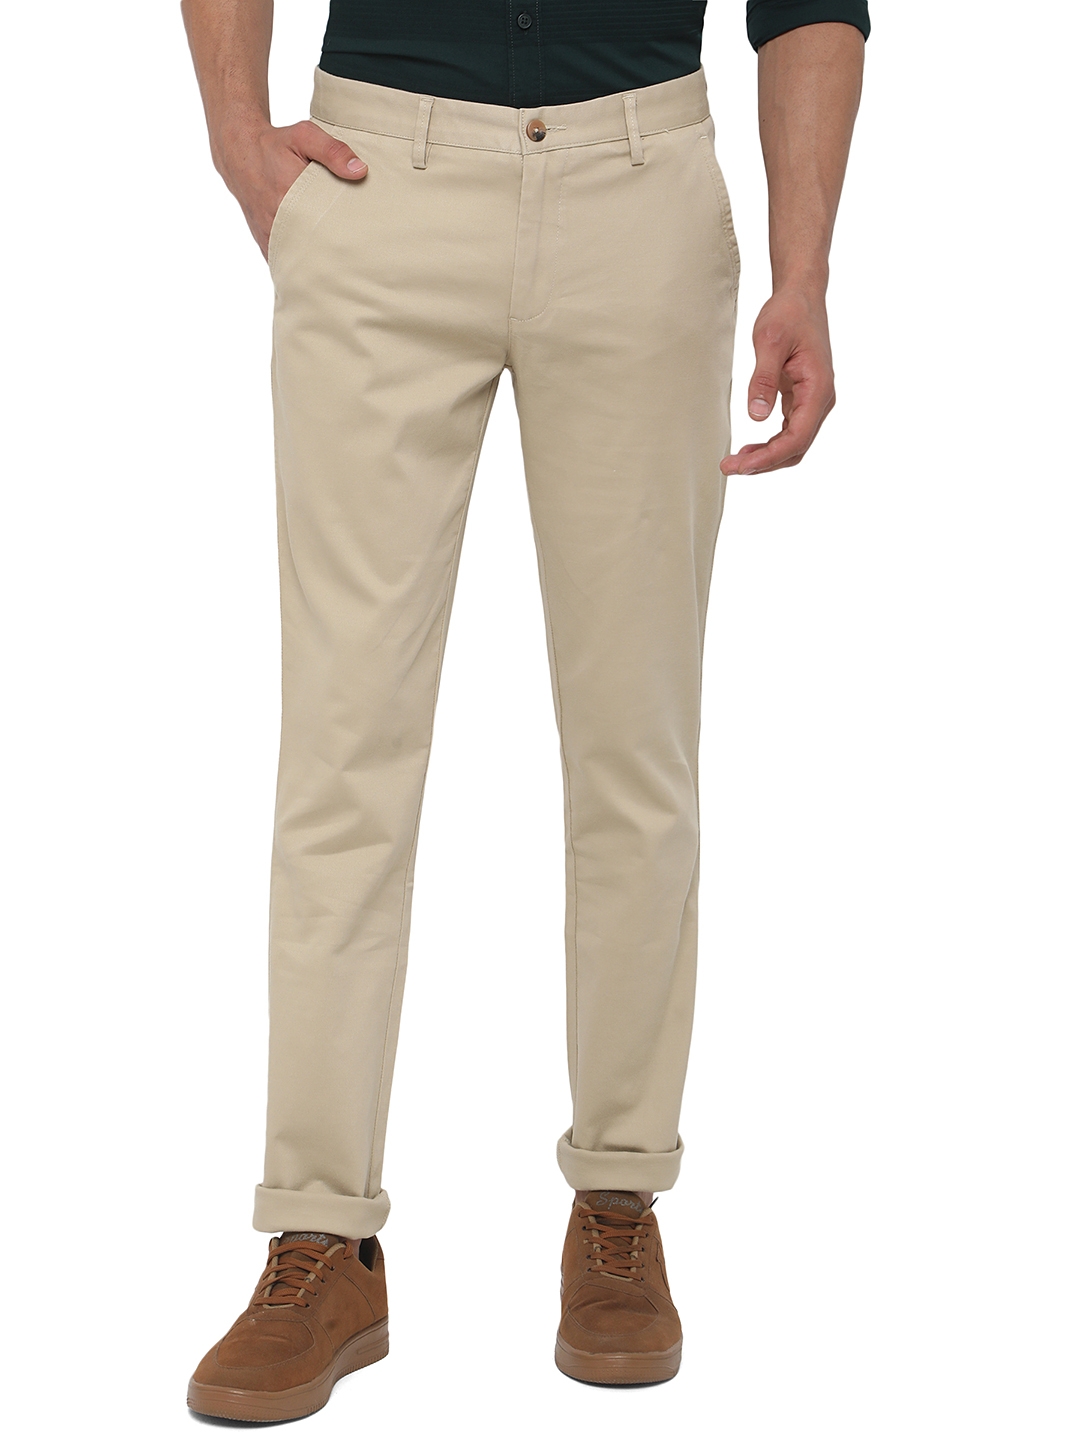 Greenfibre | Beige Solid Super Slim Fit Casual Trouser | Greenfibre